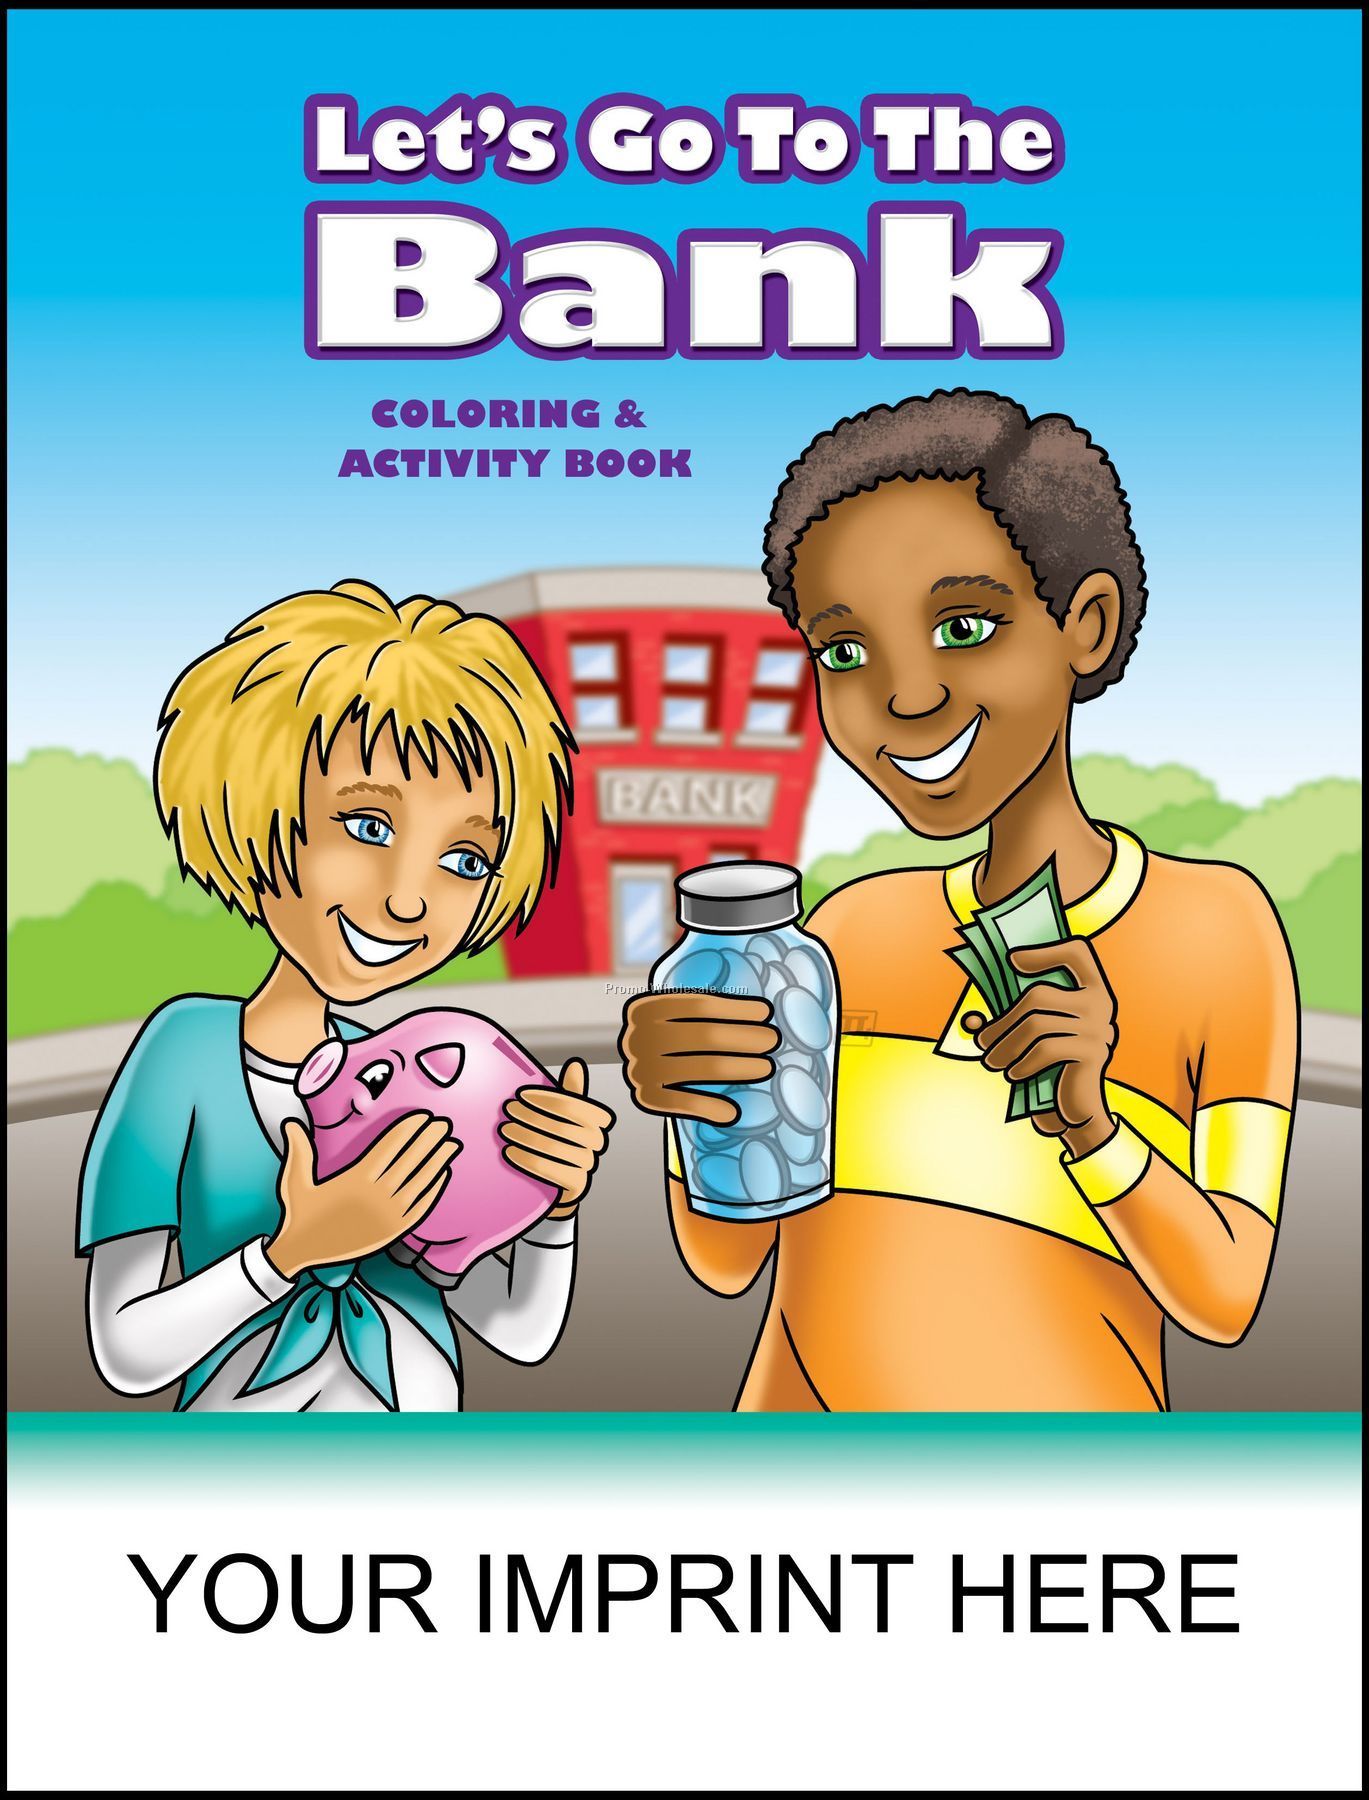 8-3/8"x10-7/8" Lets Go To The Bank Coloring & Activity Book